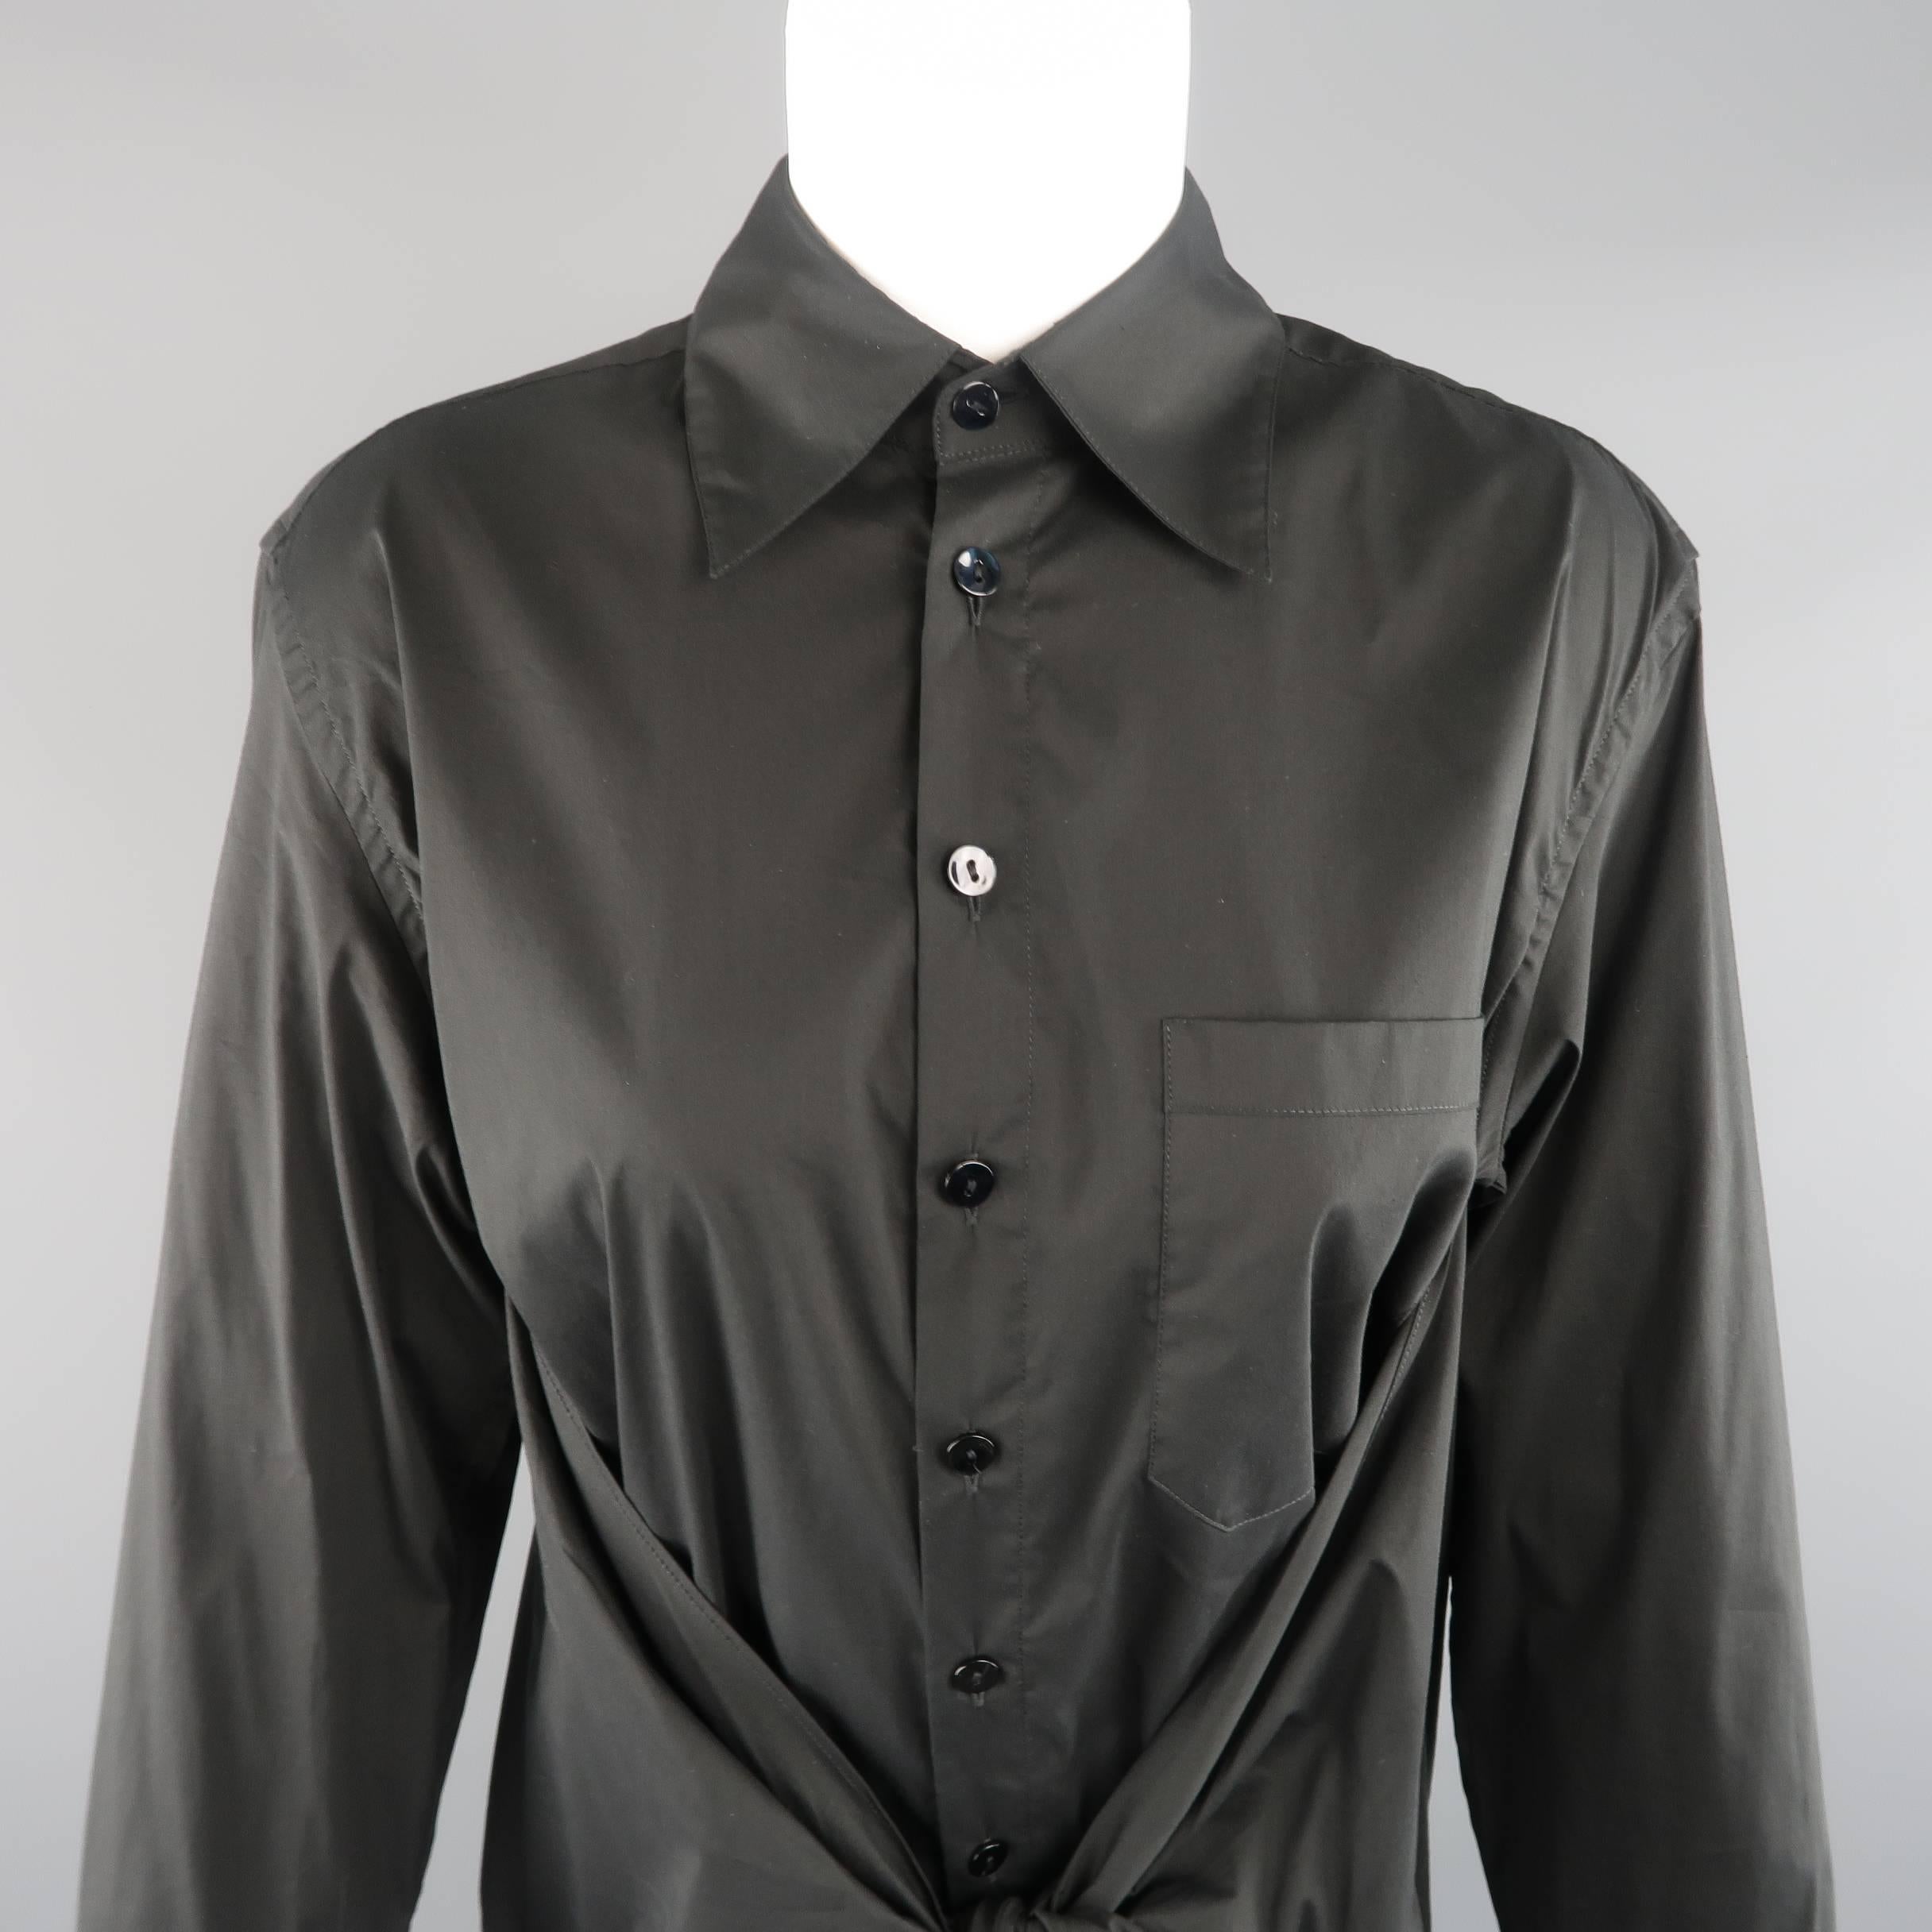 JEAN PAUL GAULTIER shirt comes in black stretch cotton and features a classic pointed collar, button up closure, and wrap tied front detail. Made in Italy.
 
Excellent Pre-Owned Condition.
Marked: US 10
 
Measurements:
 
Shoulder: 17.5 in.
Bust: 44